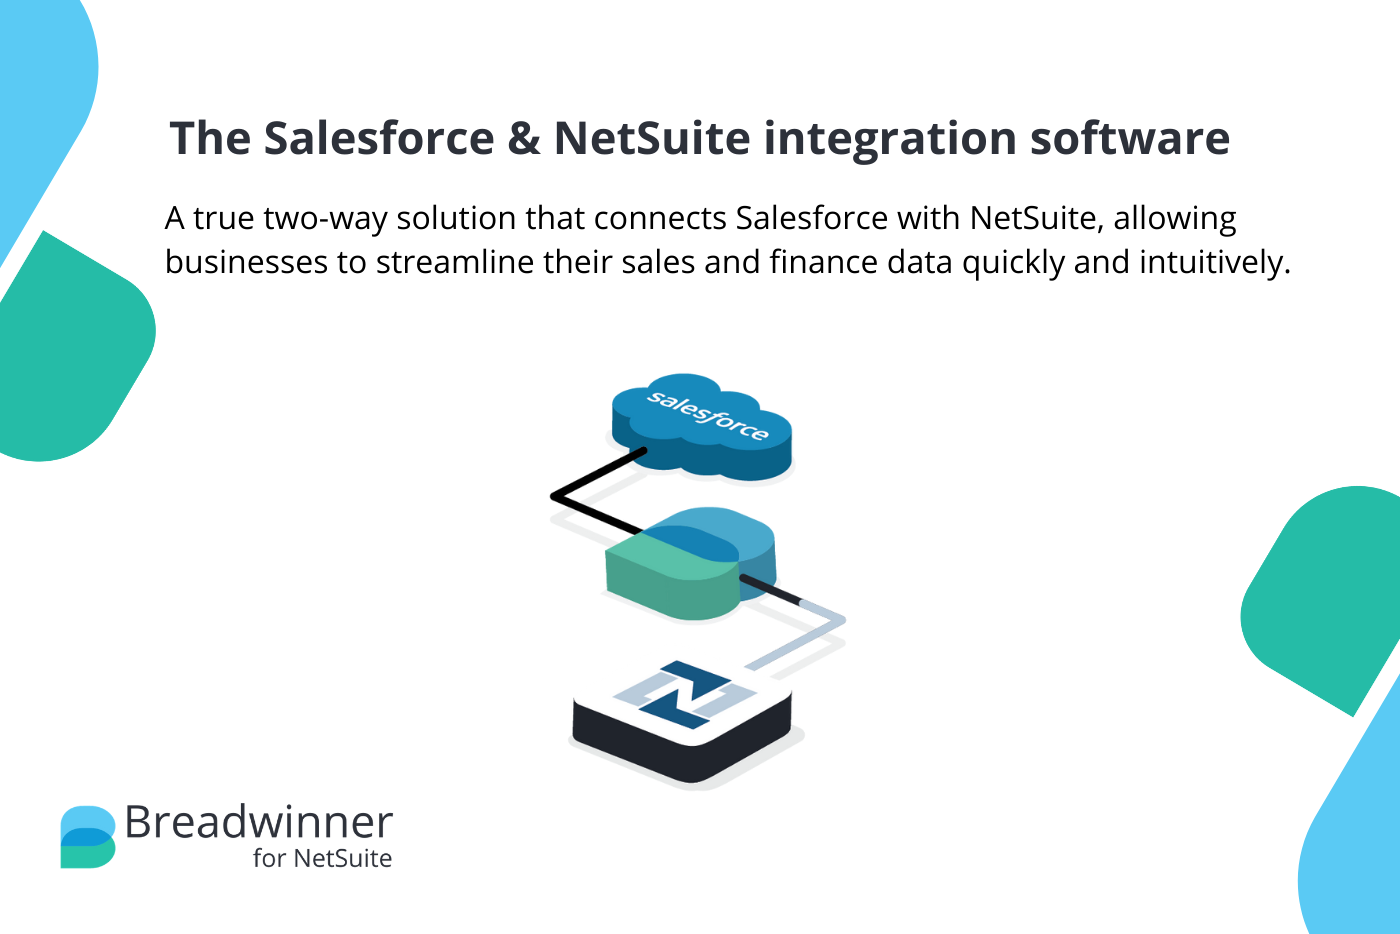 Security Considerations when Integrating Salesforce and Netsuite, Photo Credit: www.breadwinner.com